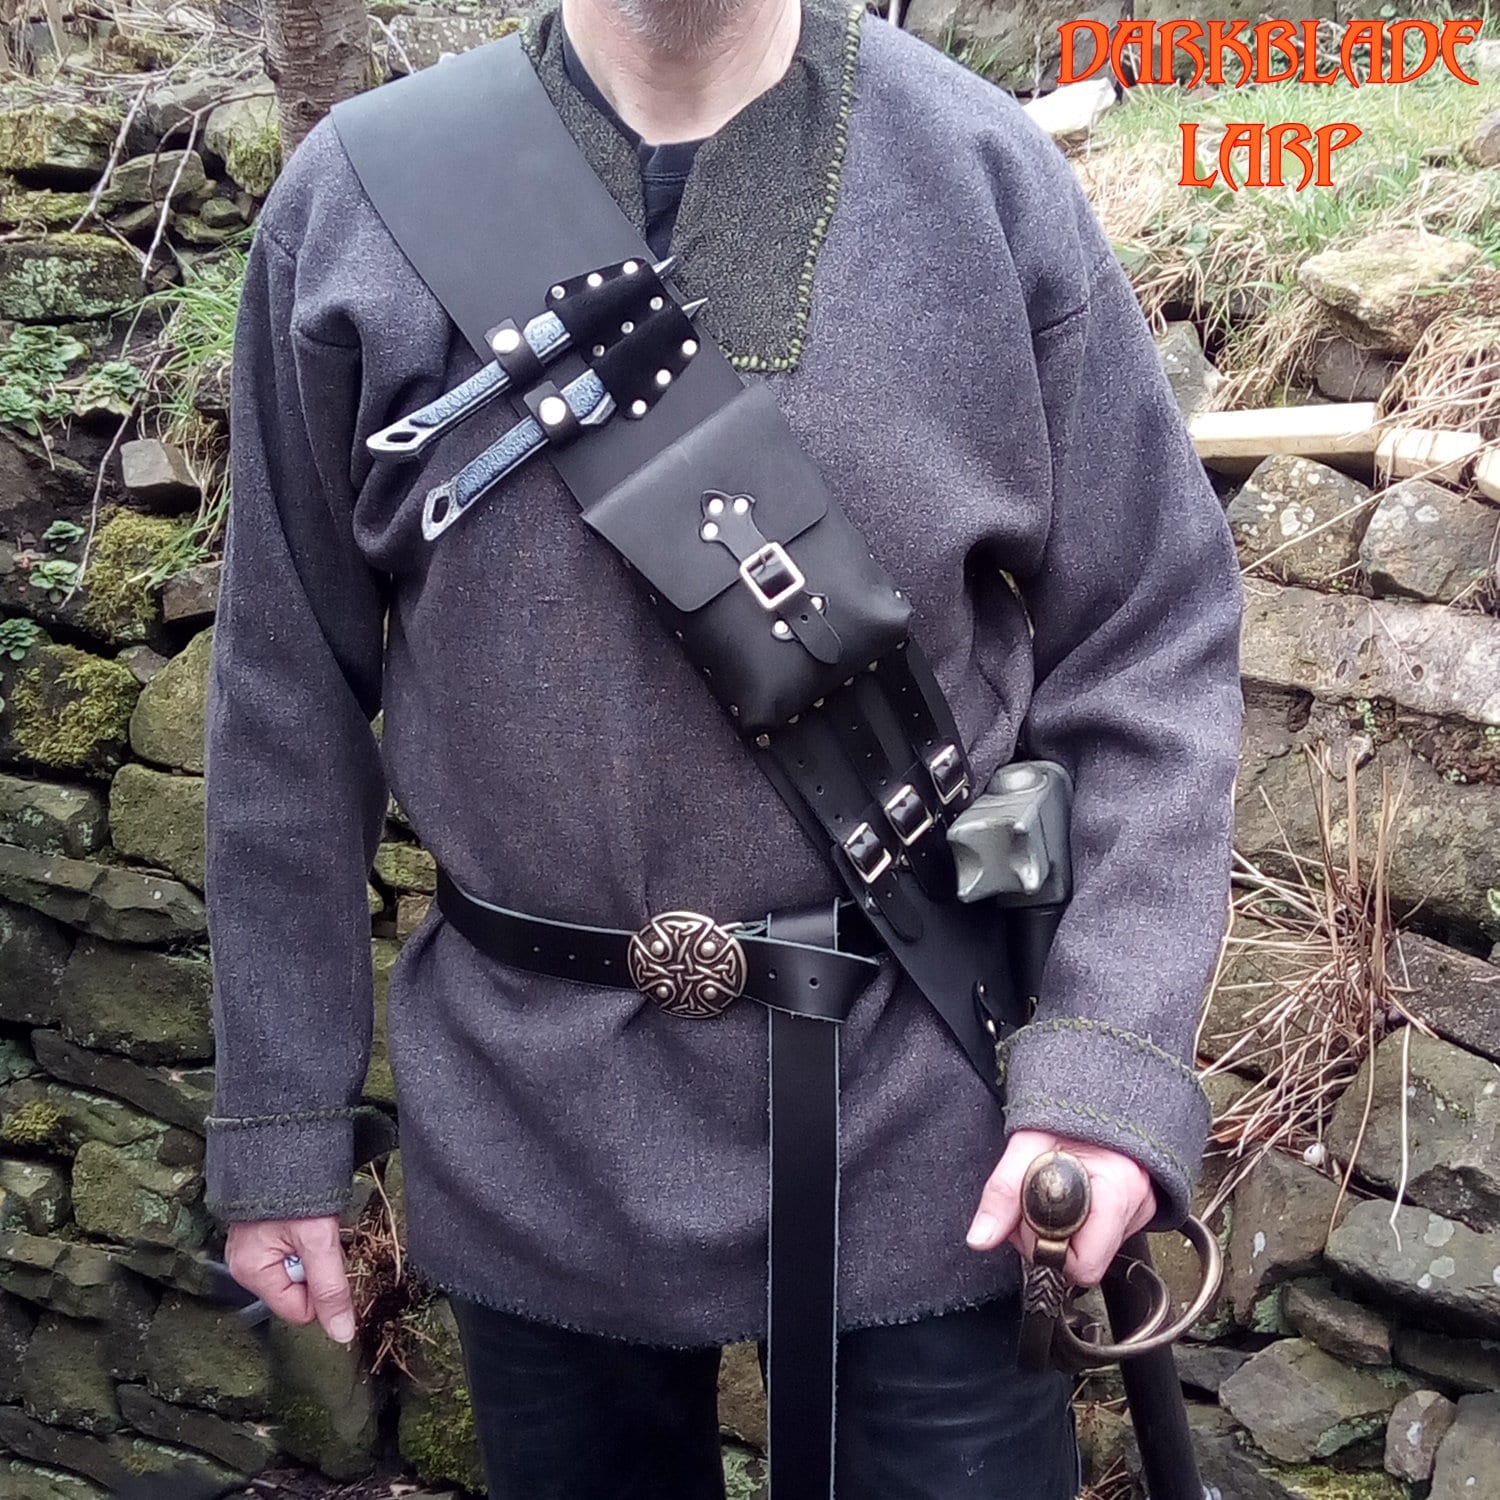 Renaissance Brown Leather, Pirate Brown Leather, Bandolier, Leather  Scabbard, Leather Bandolier, Medieval Scabbard, Bandolier Strap 